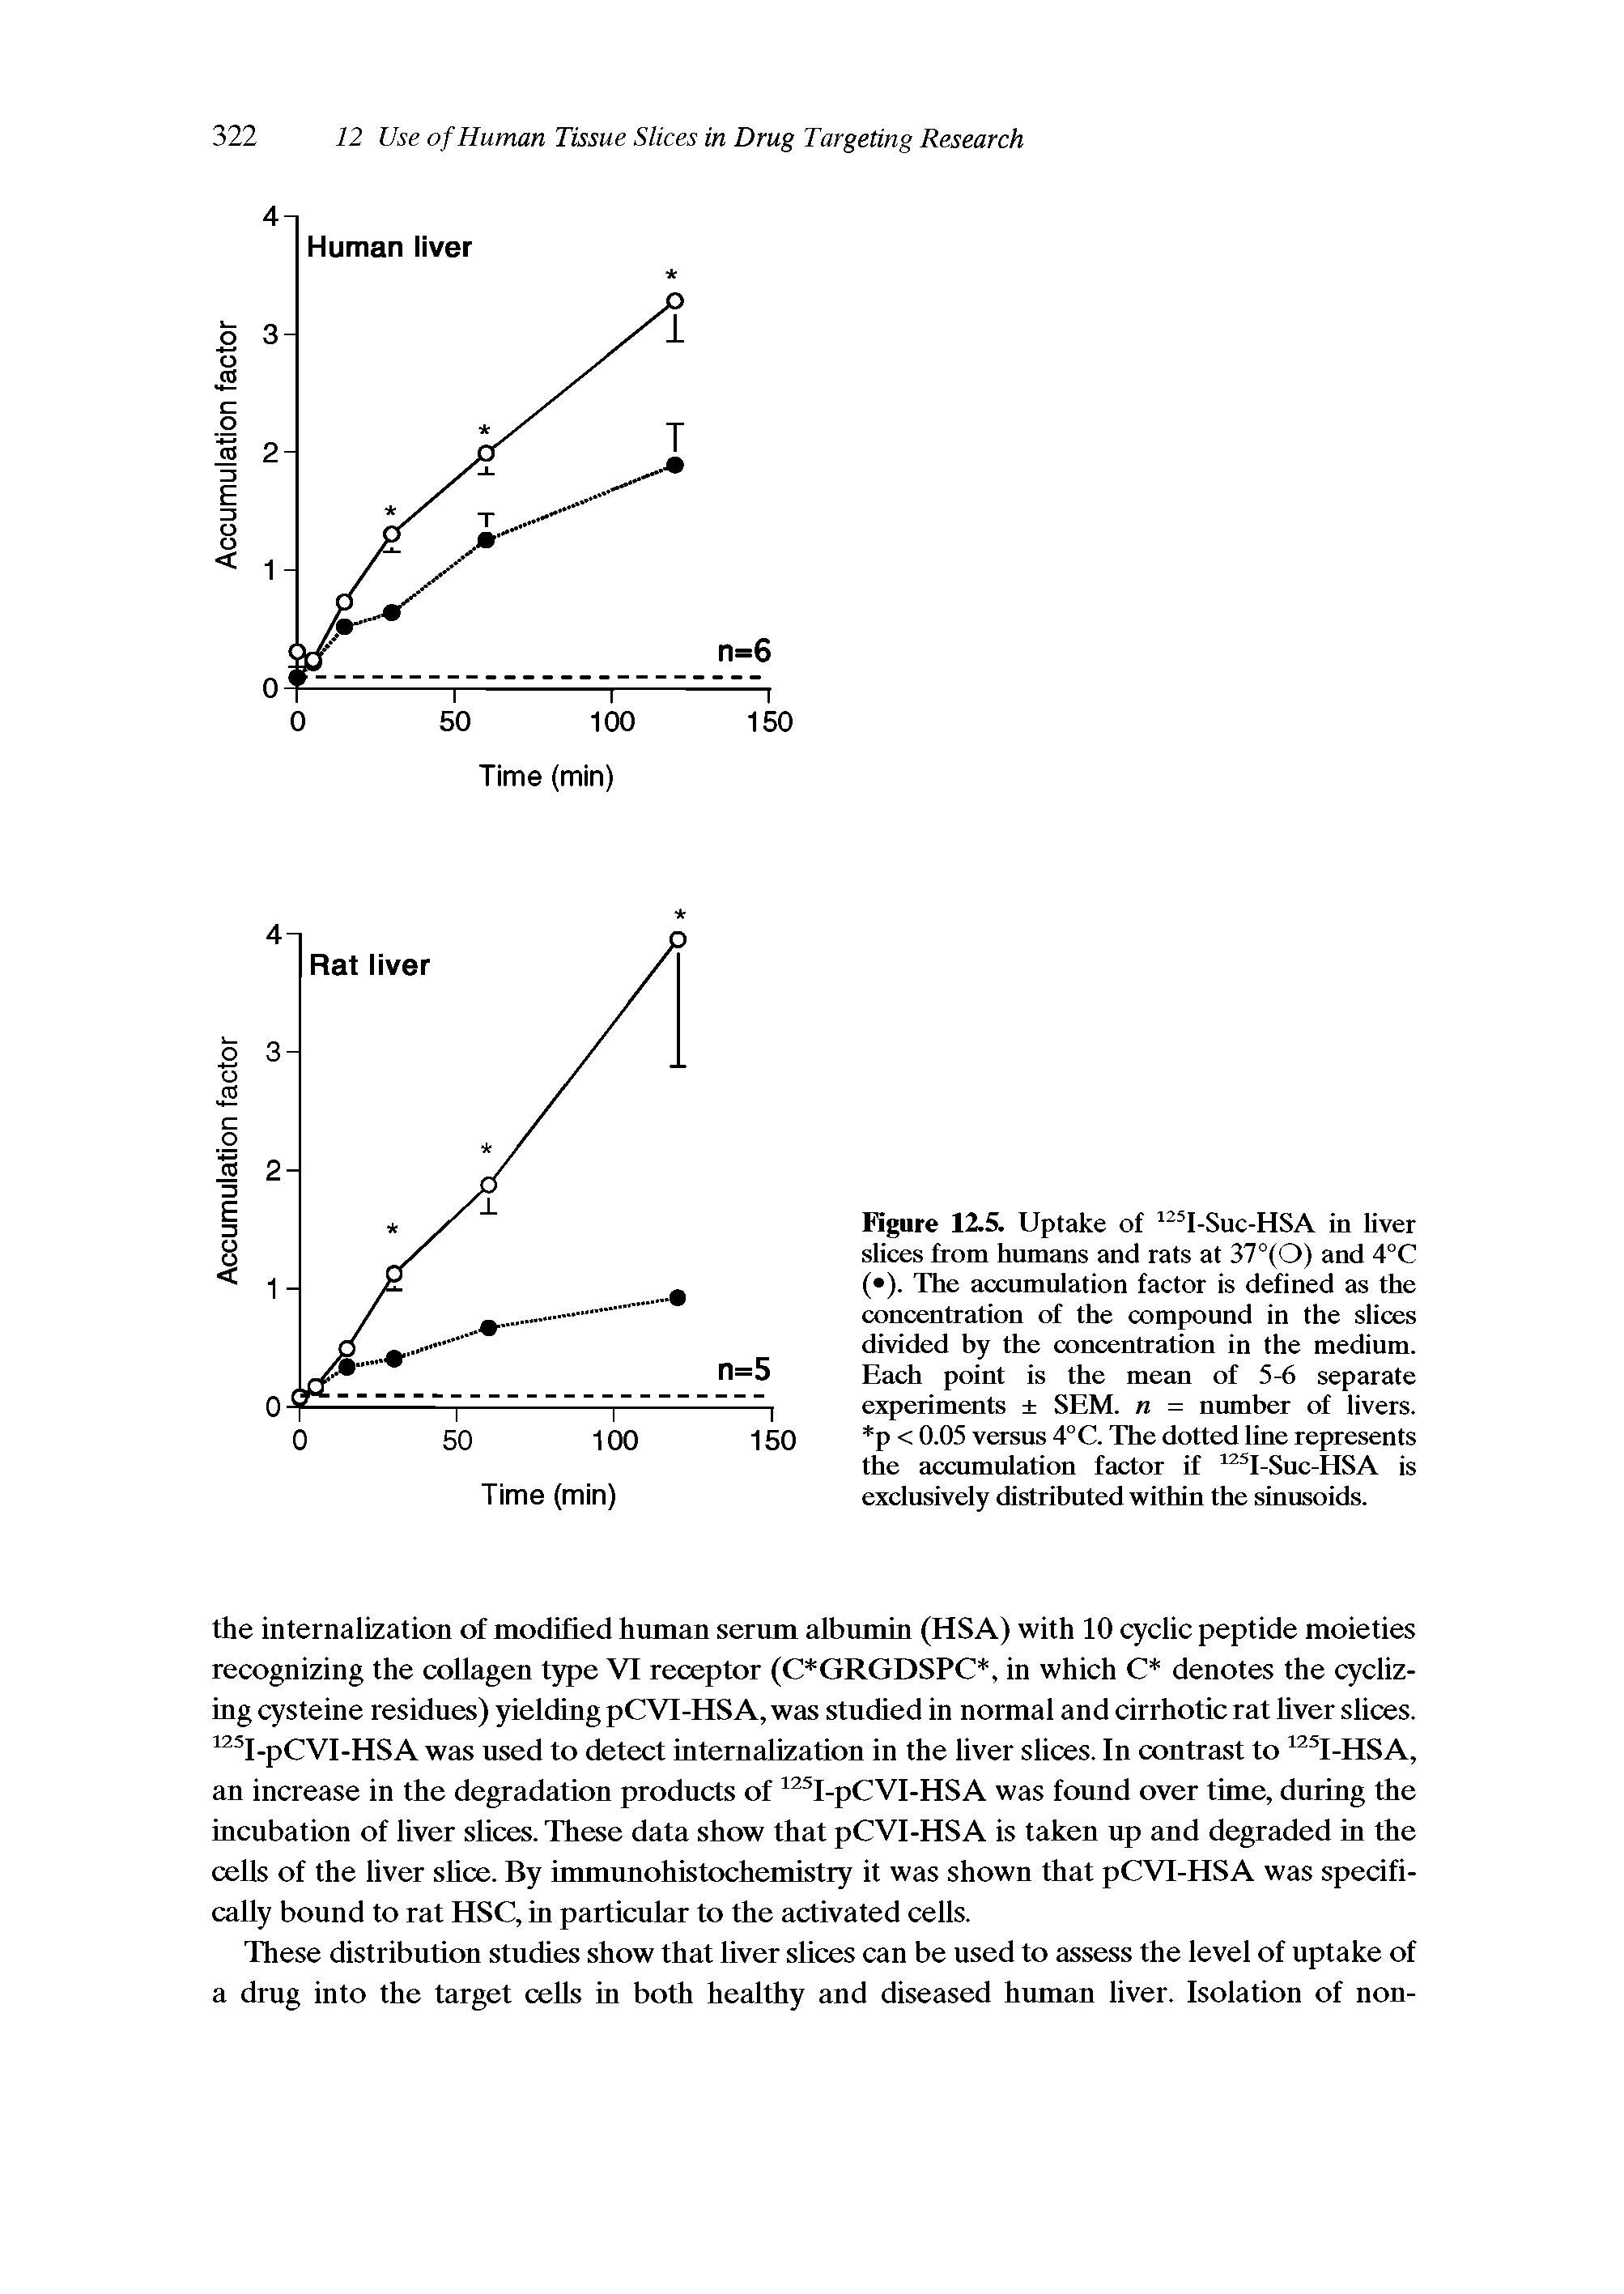 Figure 12.5. Uptake of I-Suc-HSA in liver slices from humans and rats at 37°(0) and 4°C ( ). The accumulation factor is defined as the concentration of the compound in the slices divided hy the concentration in the medium. Each point is the mean of 5-6 separate experiments SEM. n = number of livers. p < 0.05 versus 4°C. The dotted line represents the accumulation factor if I-Suc-HSA is exclusively distrihuted within the sinusoids.